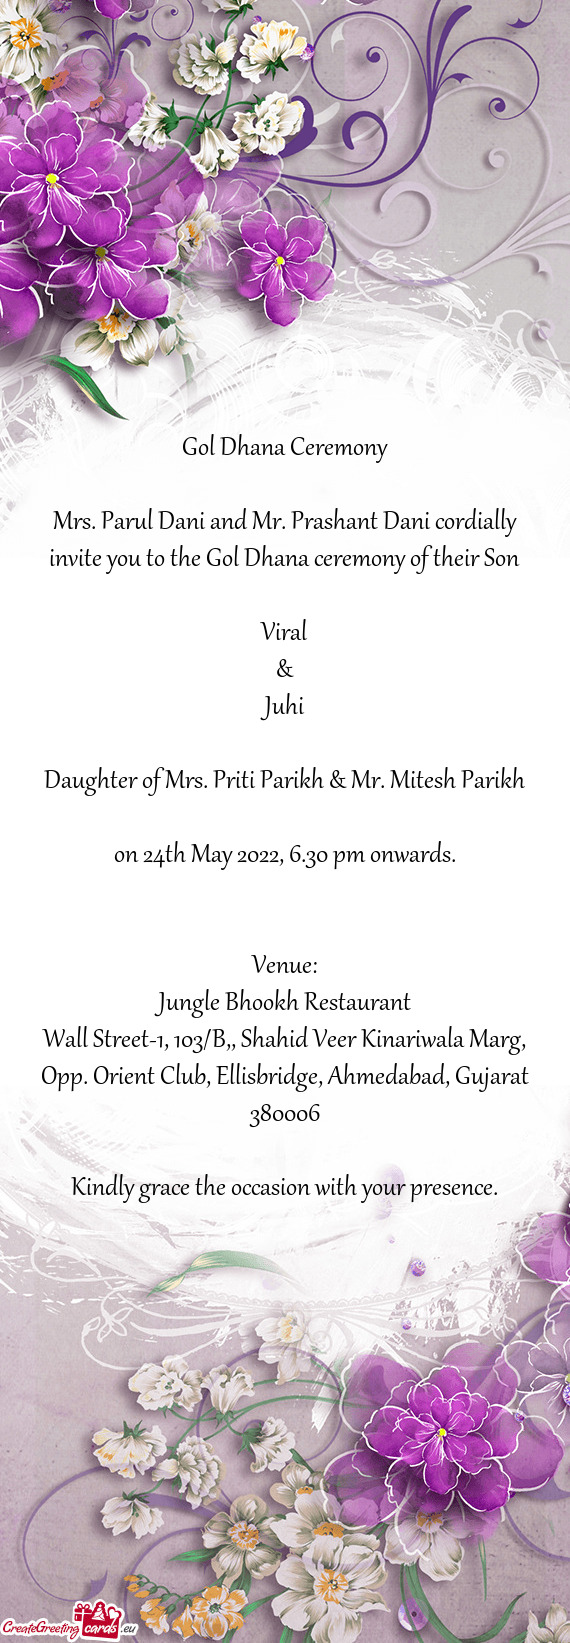 Mrs. Parul Dani and Mr. Prashant Dani cordially invite you to the Gol Dhana ceremony of their Son